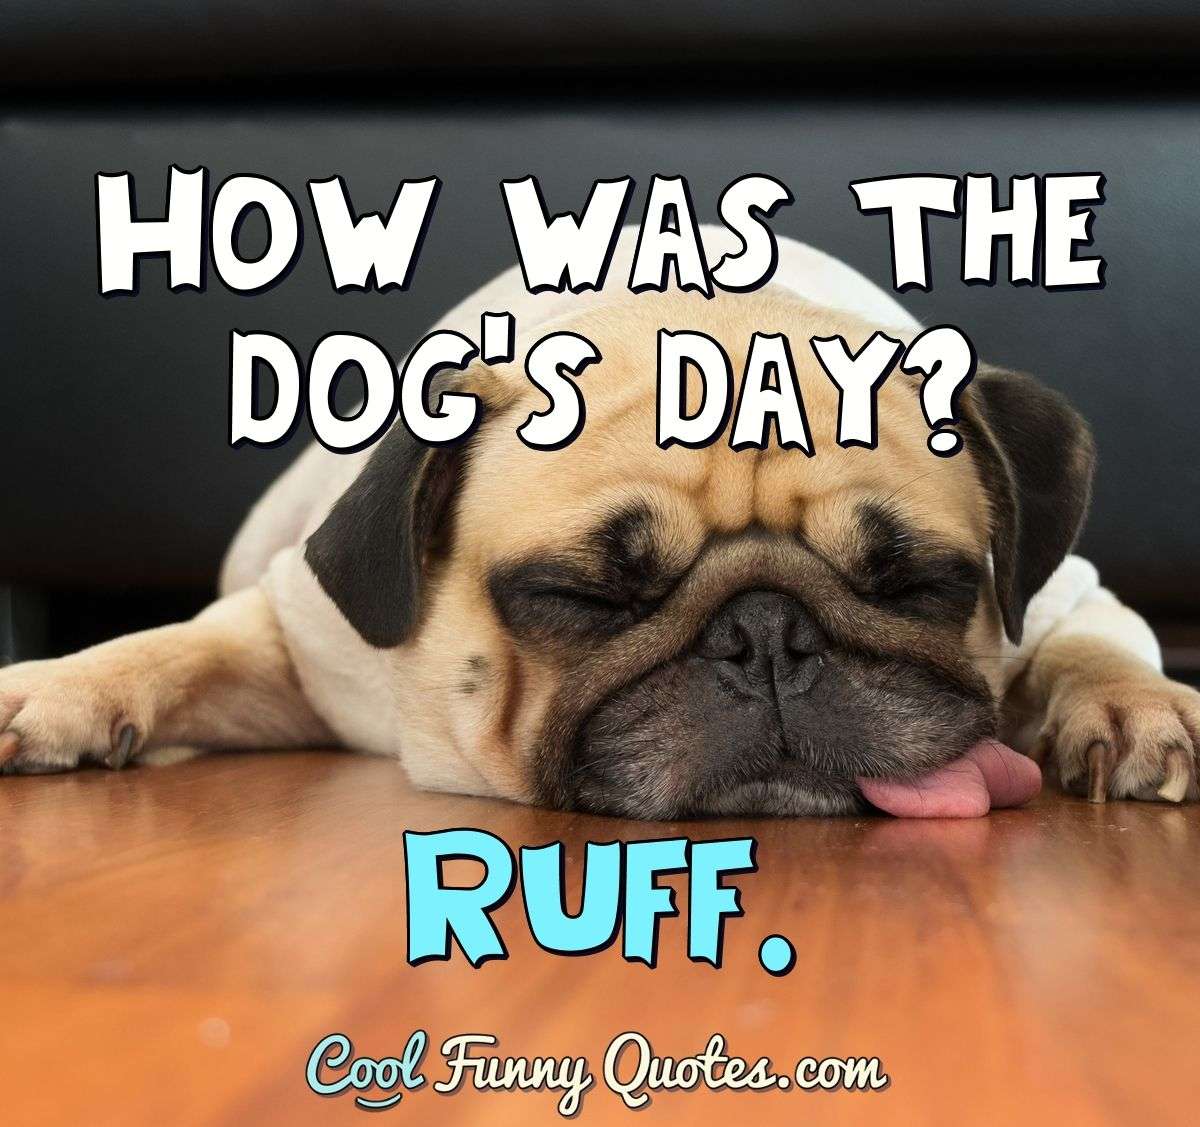 How was the dog's day? Ruff. - Anonymous